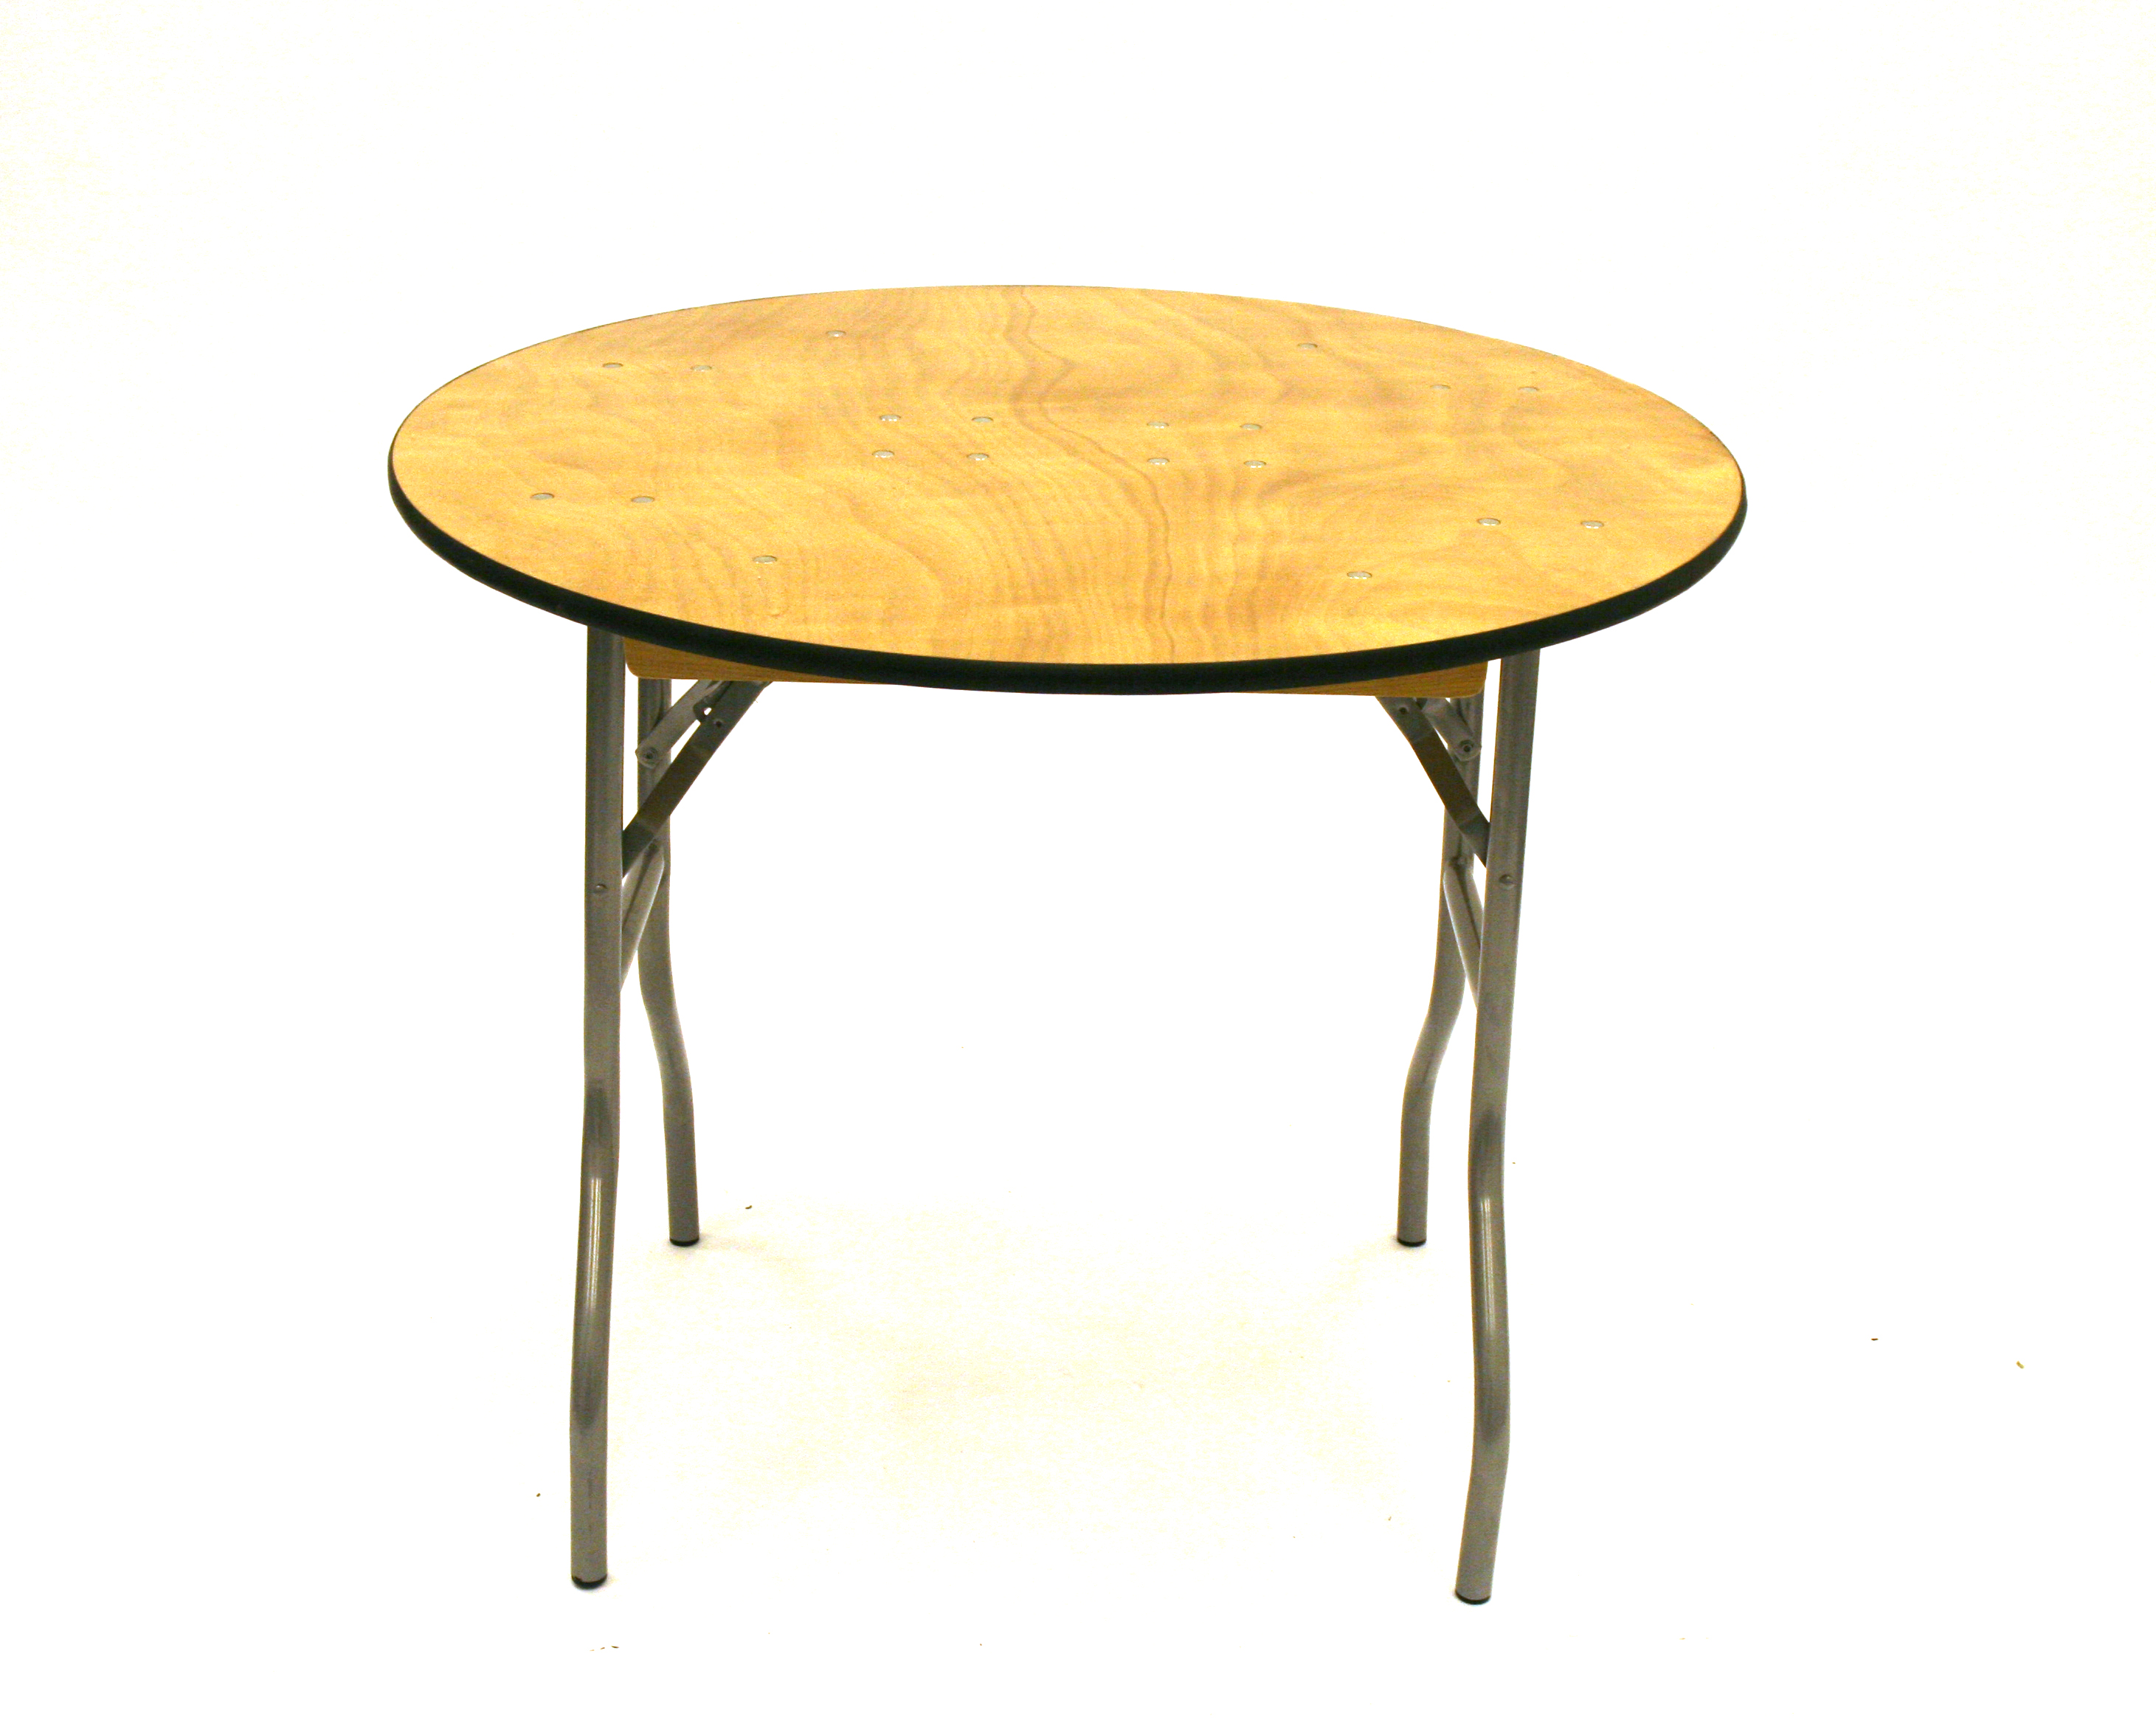 Round Banqueting Table - 3" Varnished Table - BE Furniture Sales